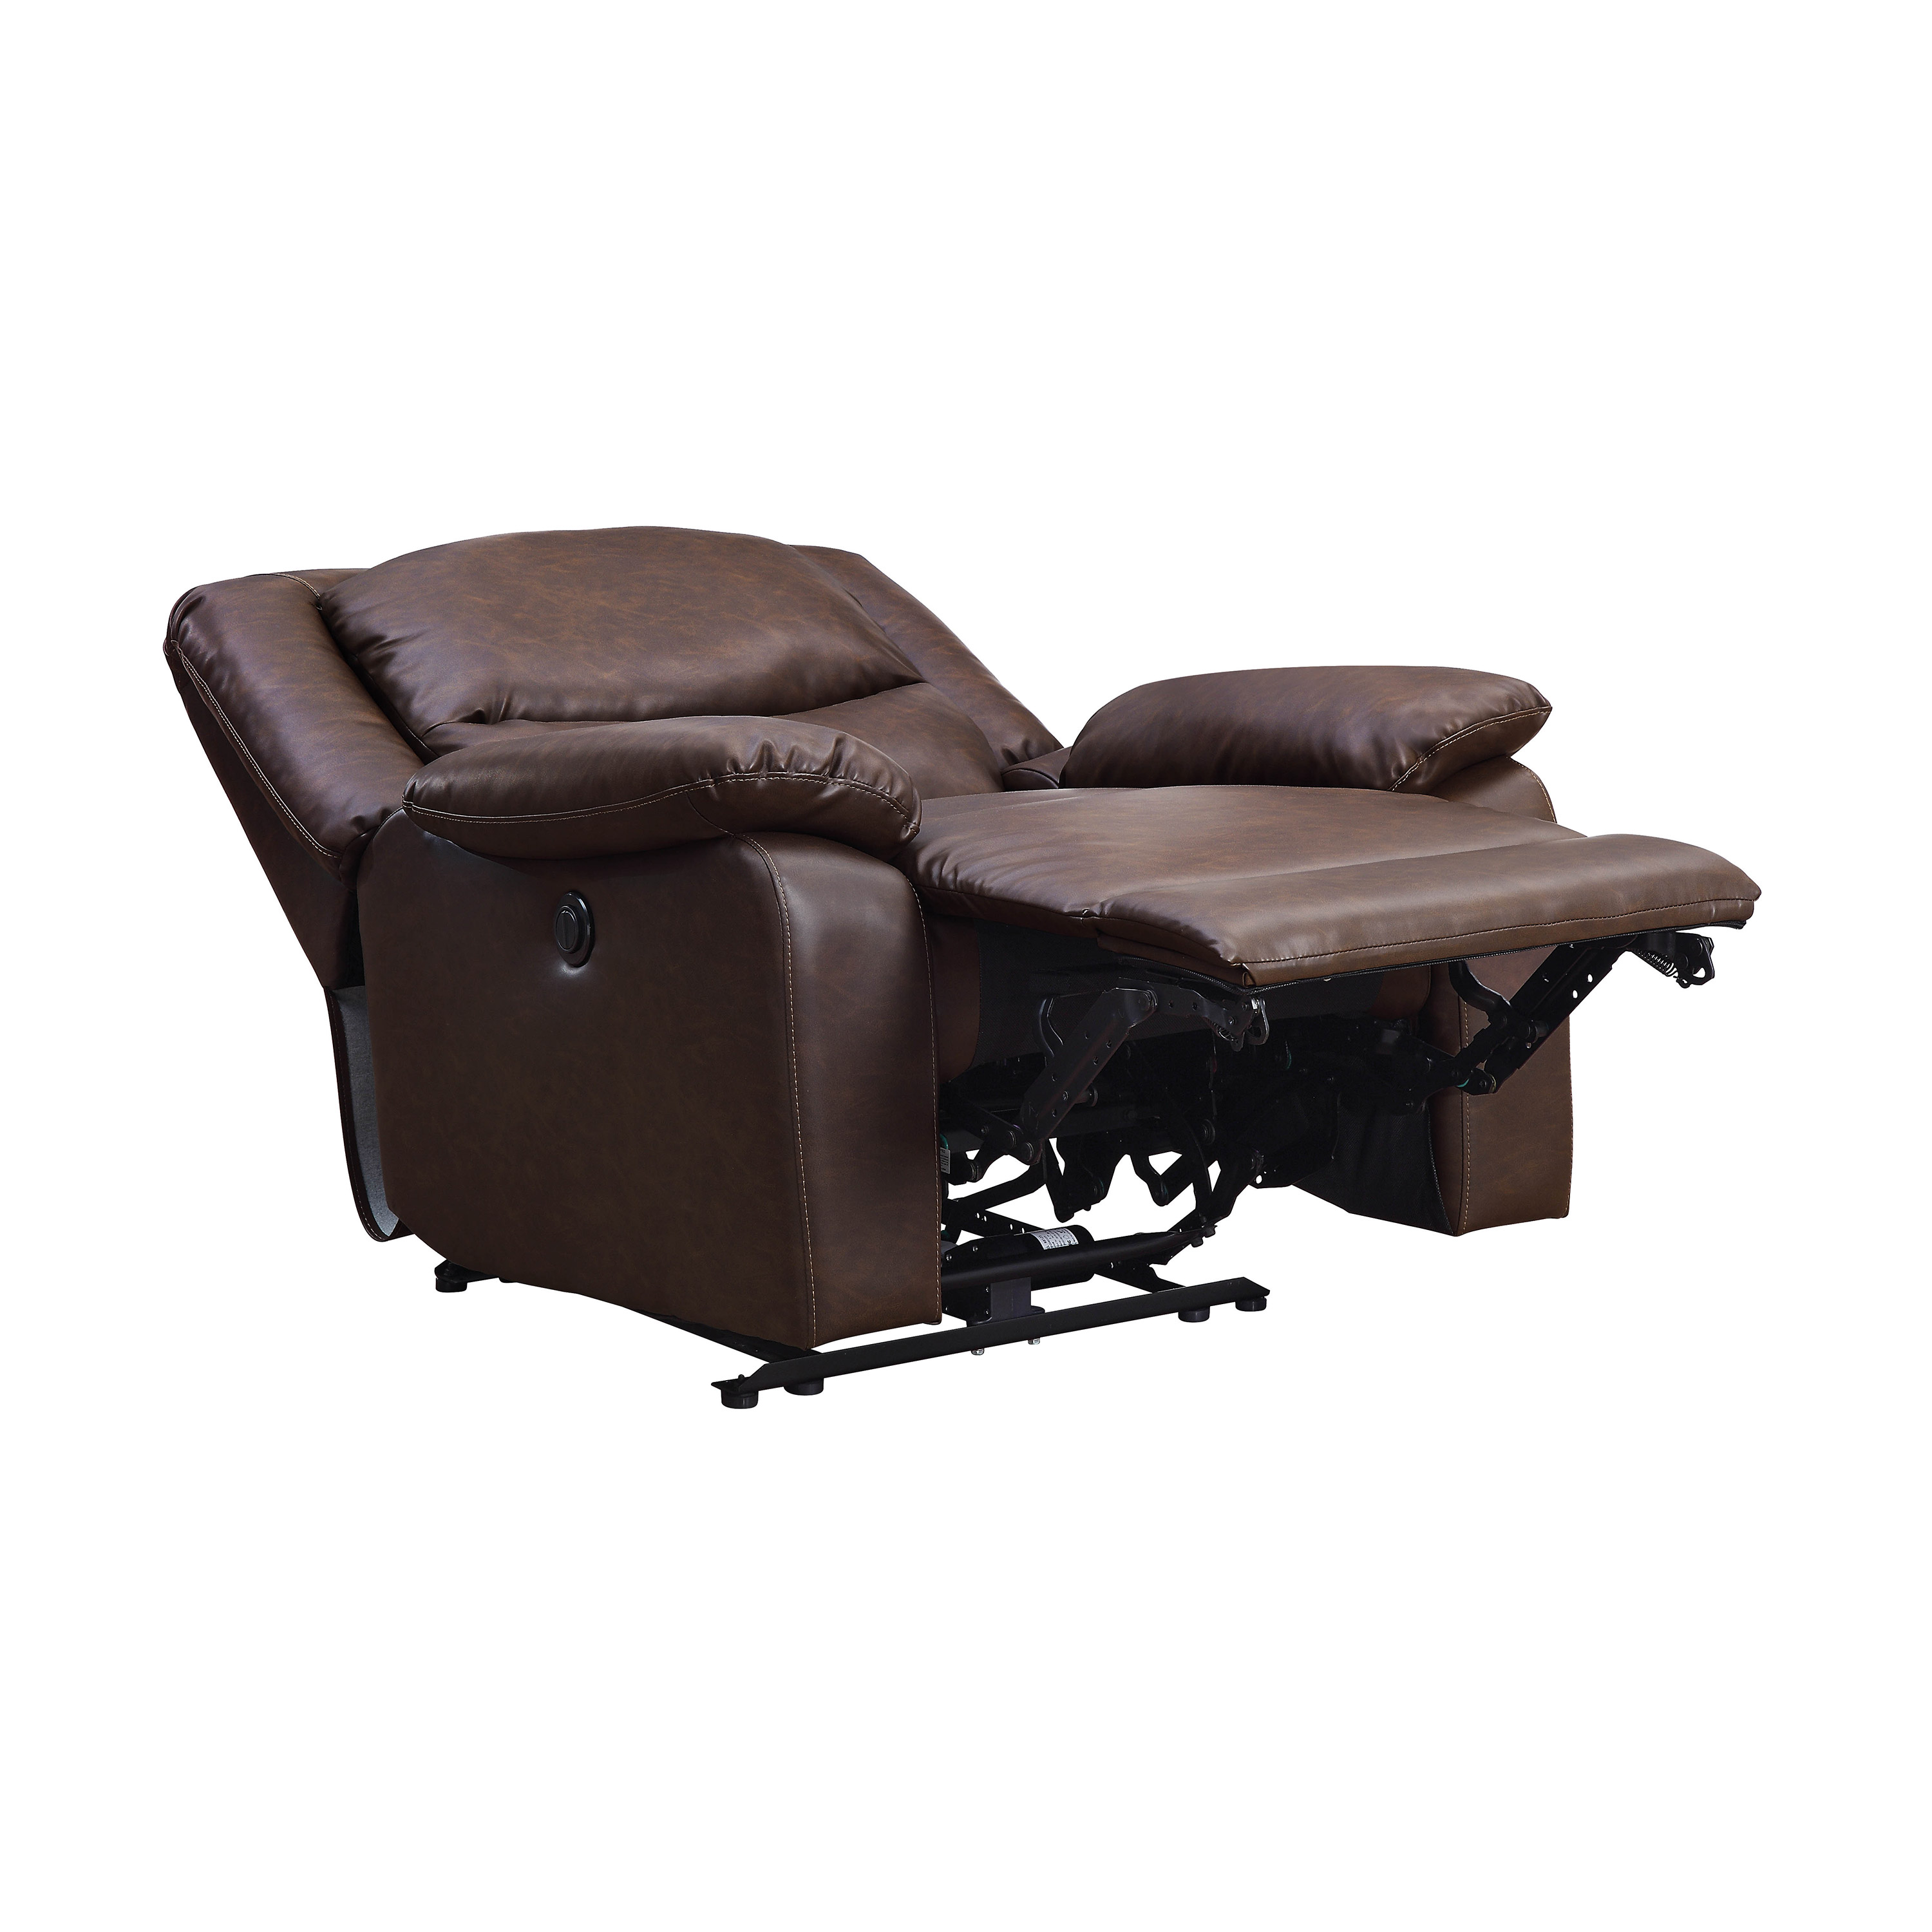 Serta Push-Button Power Recliner with Deep Body Cushions, Brown Faux Leather Upholstery - image 5 of 9